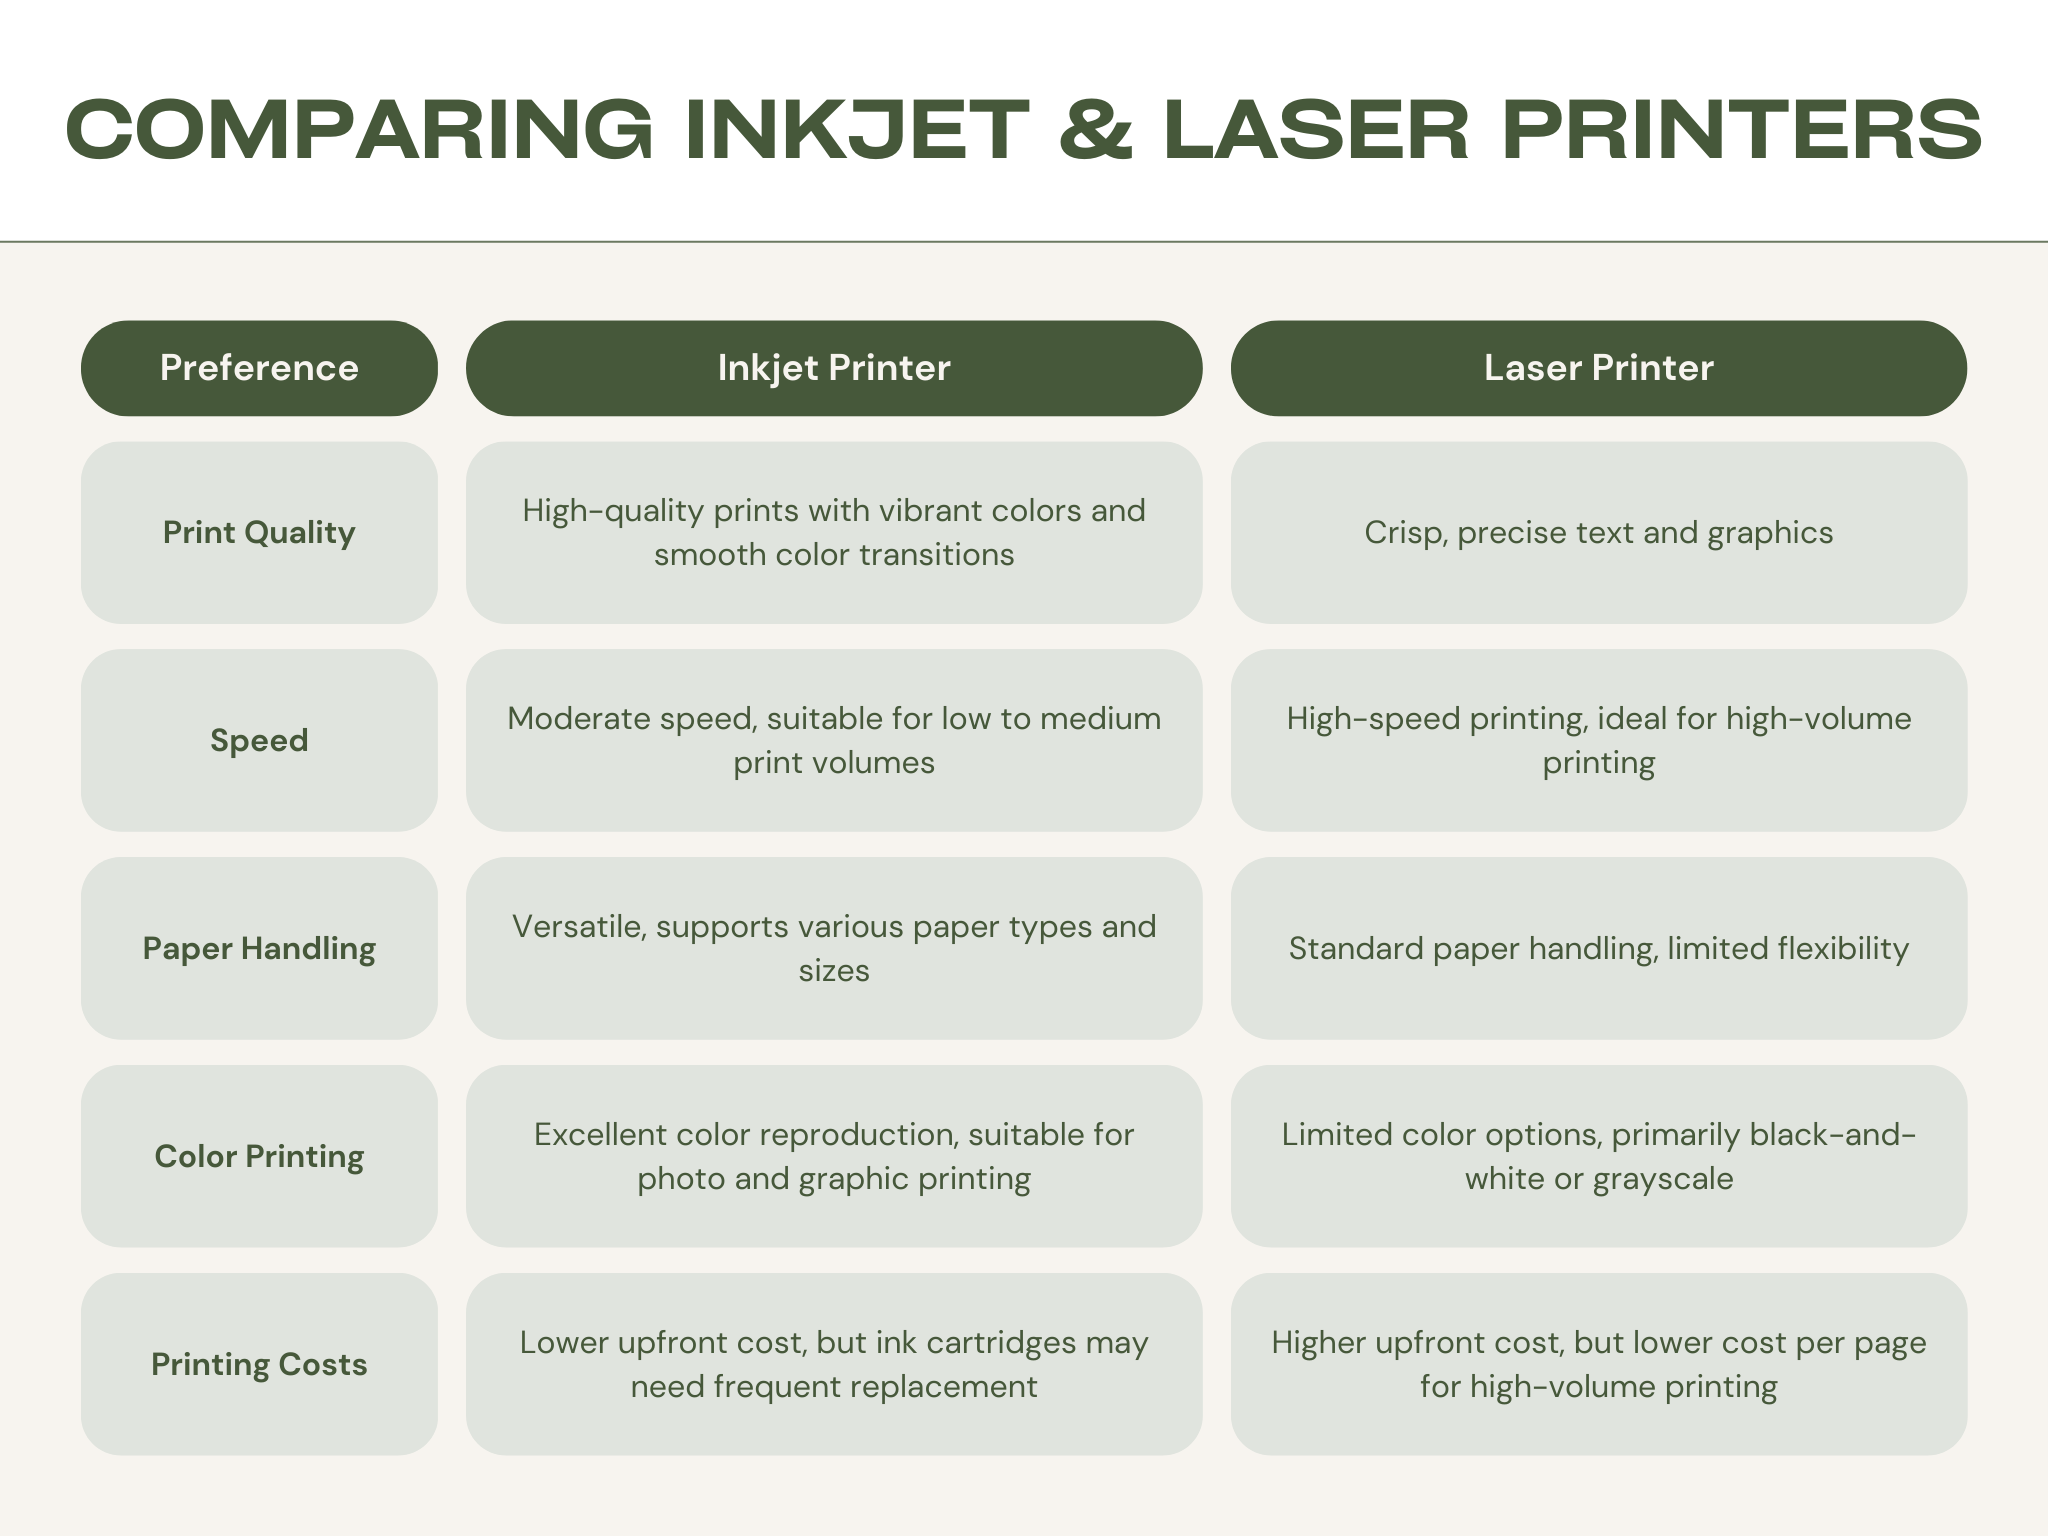 Table on comparing inkjet and laser printers